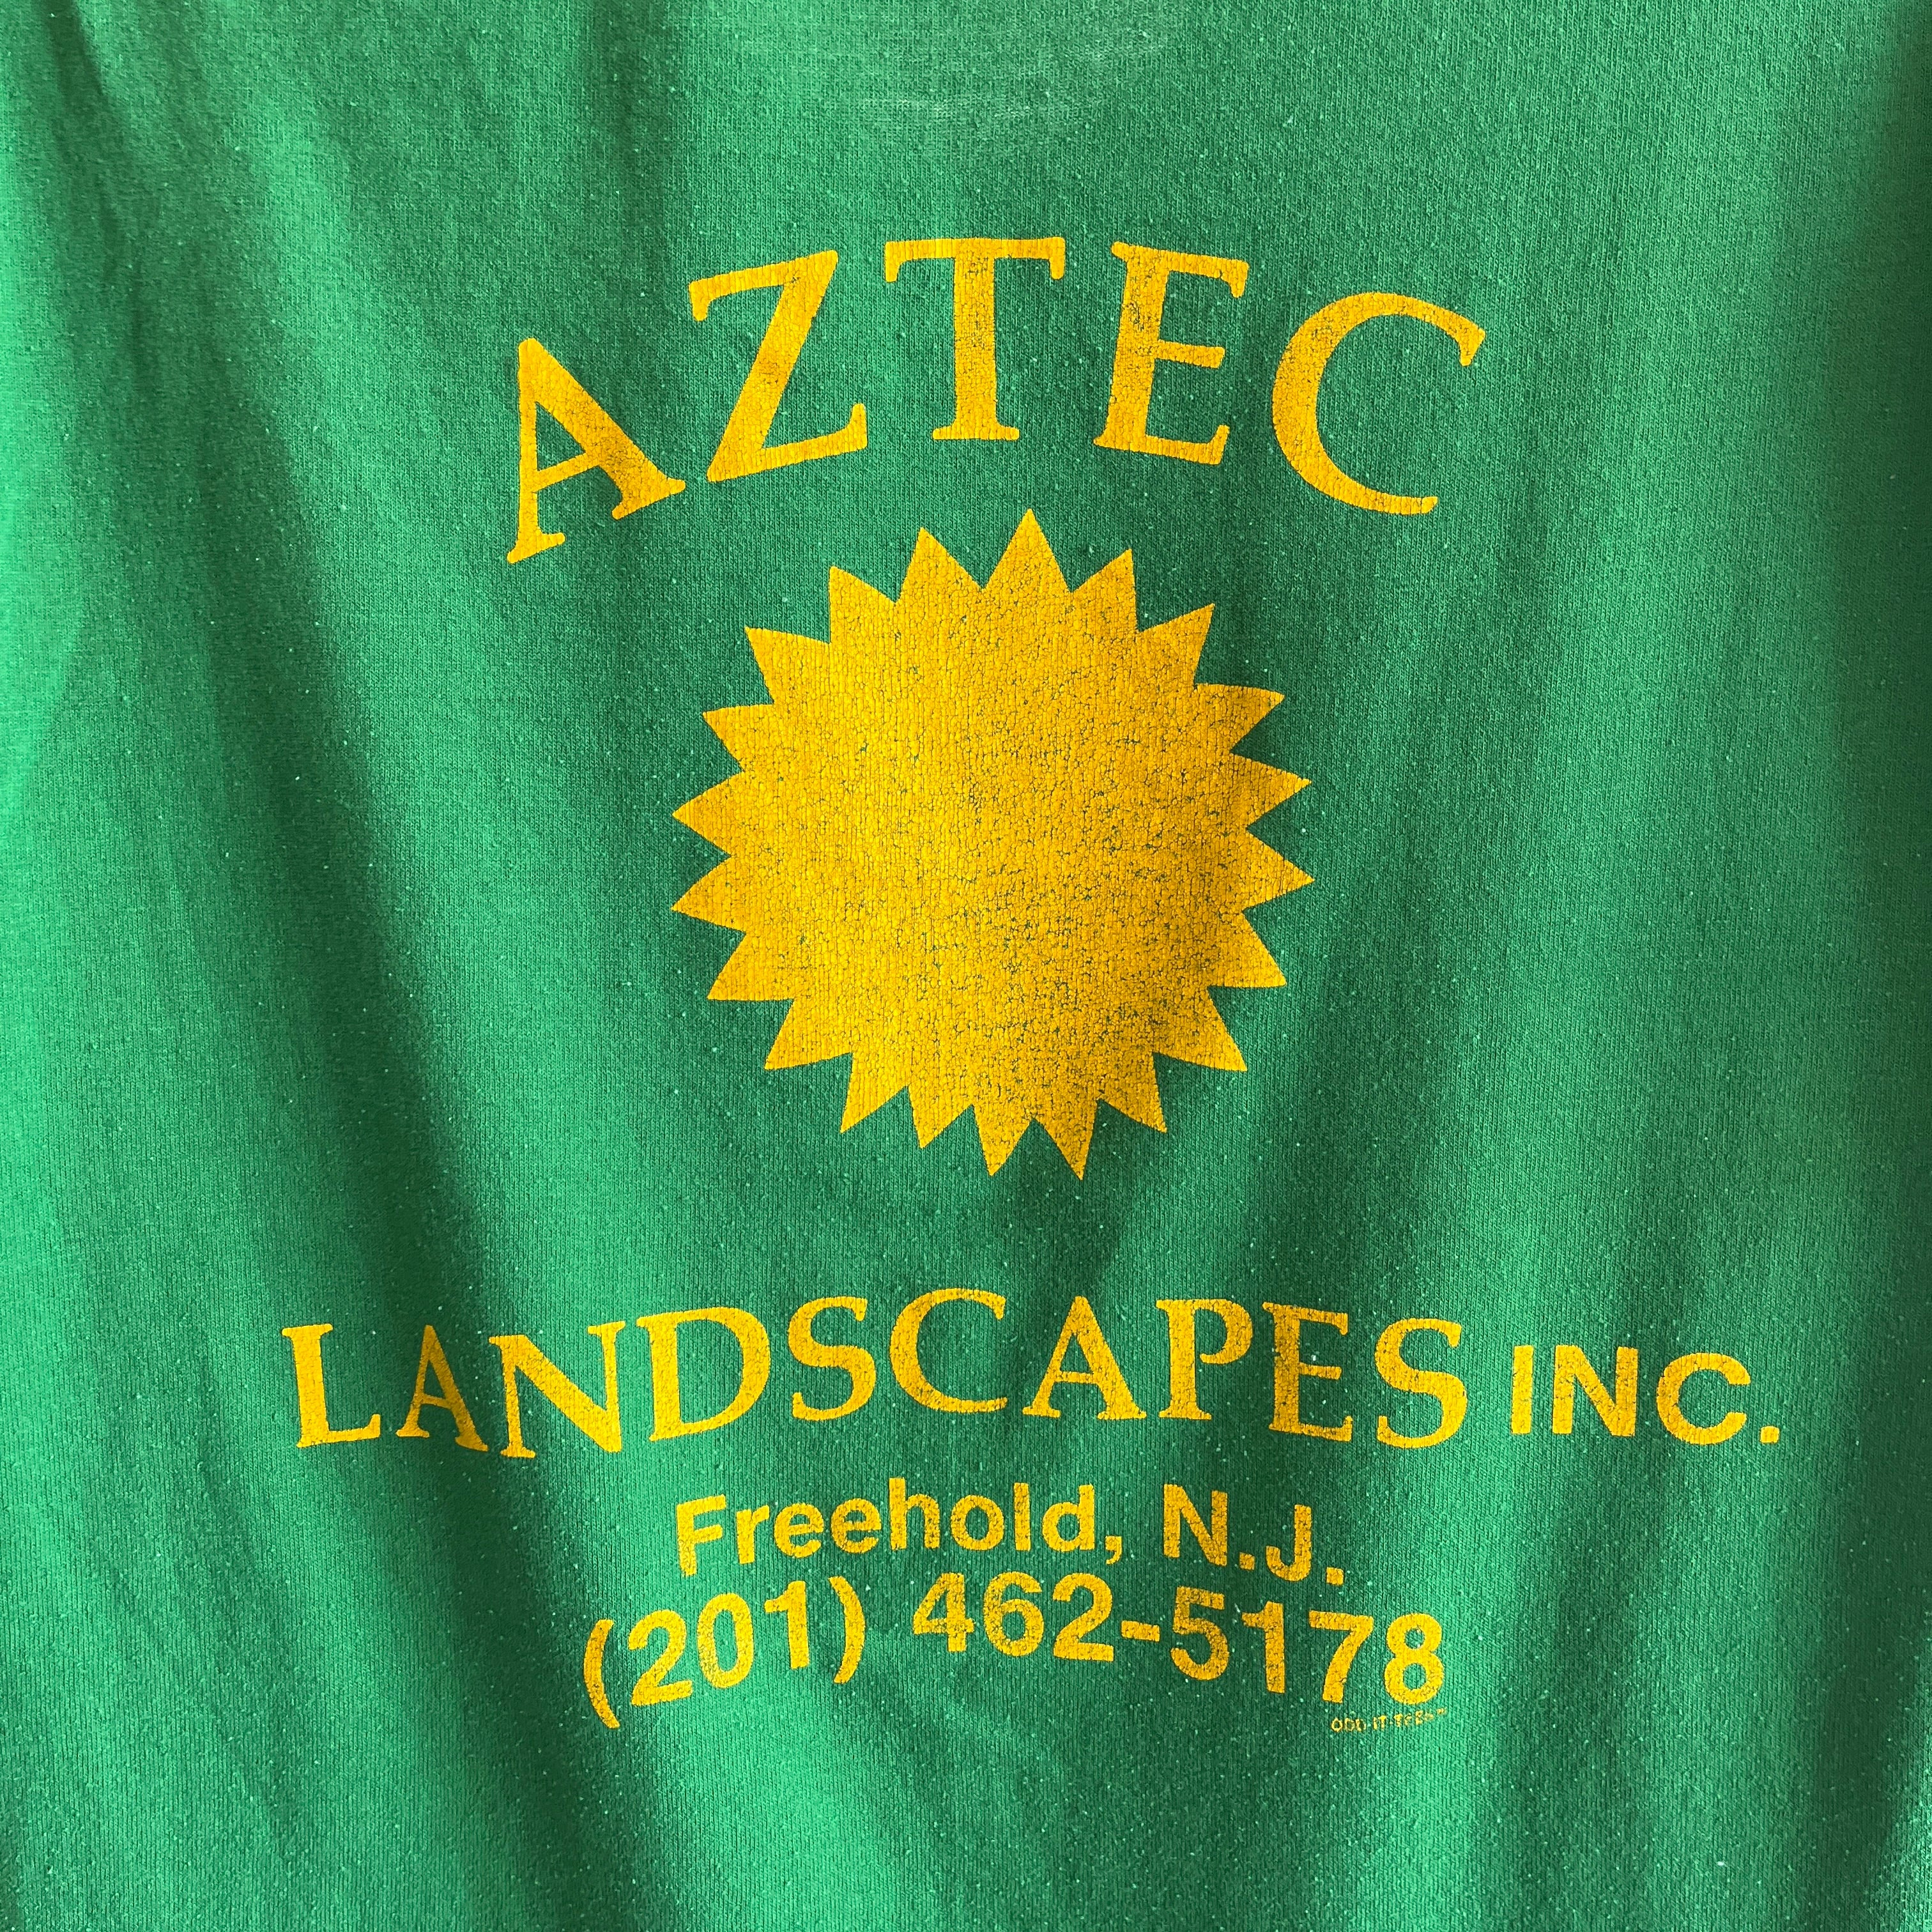 GG - 1980s Kelly Green Landscaping Company on Backside Pocket T-Shirt